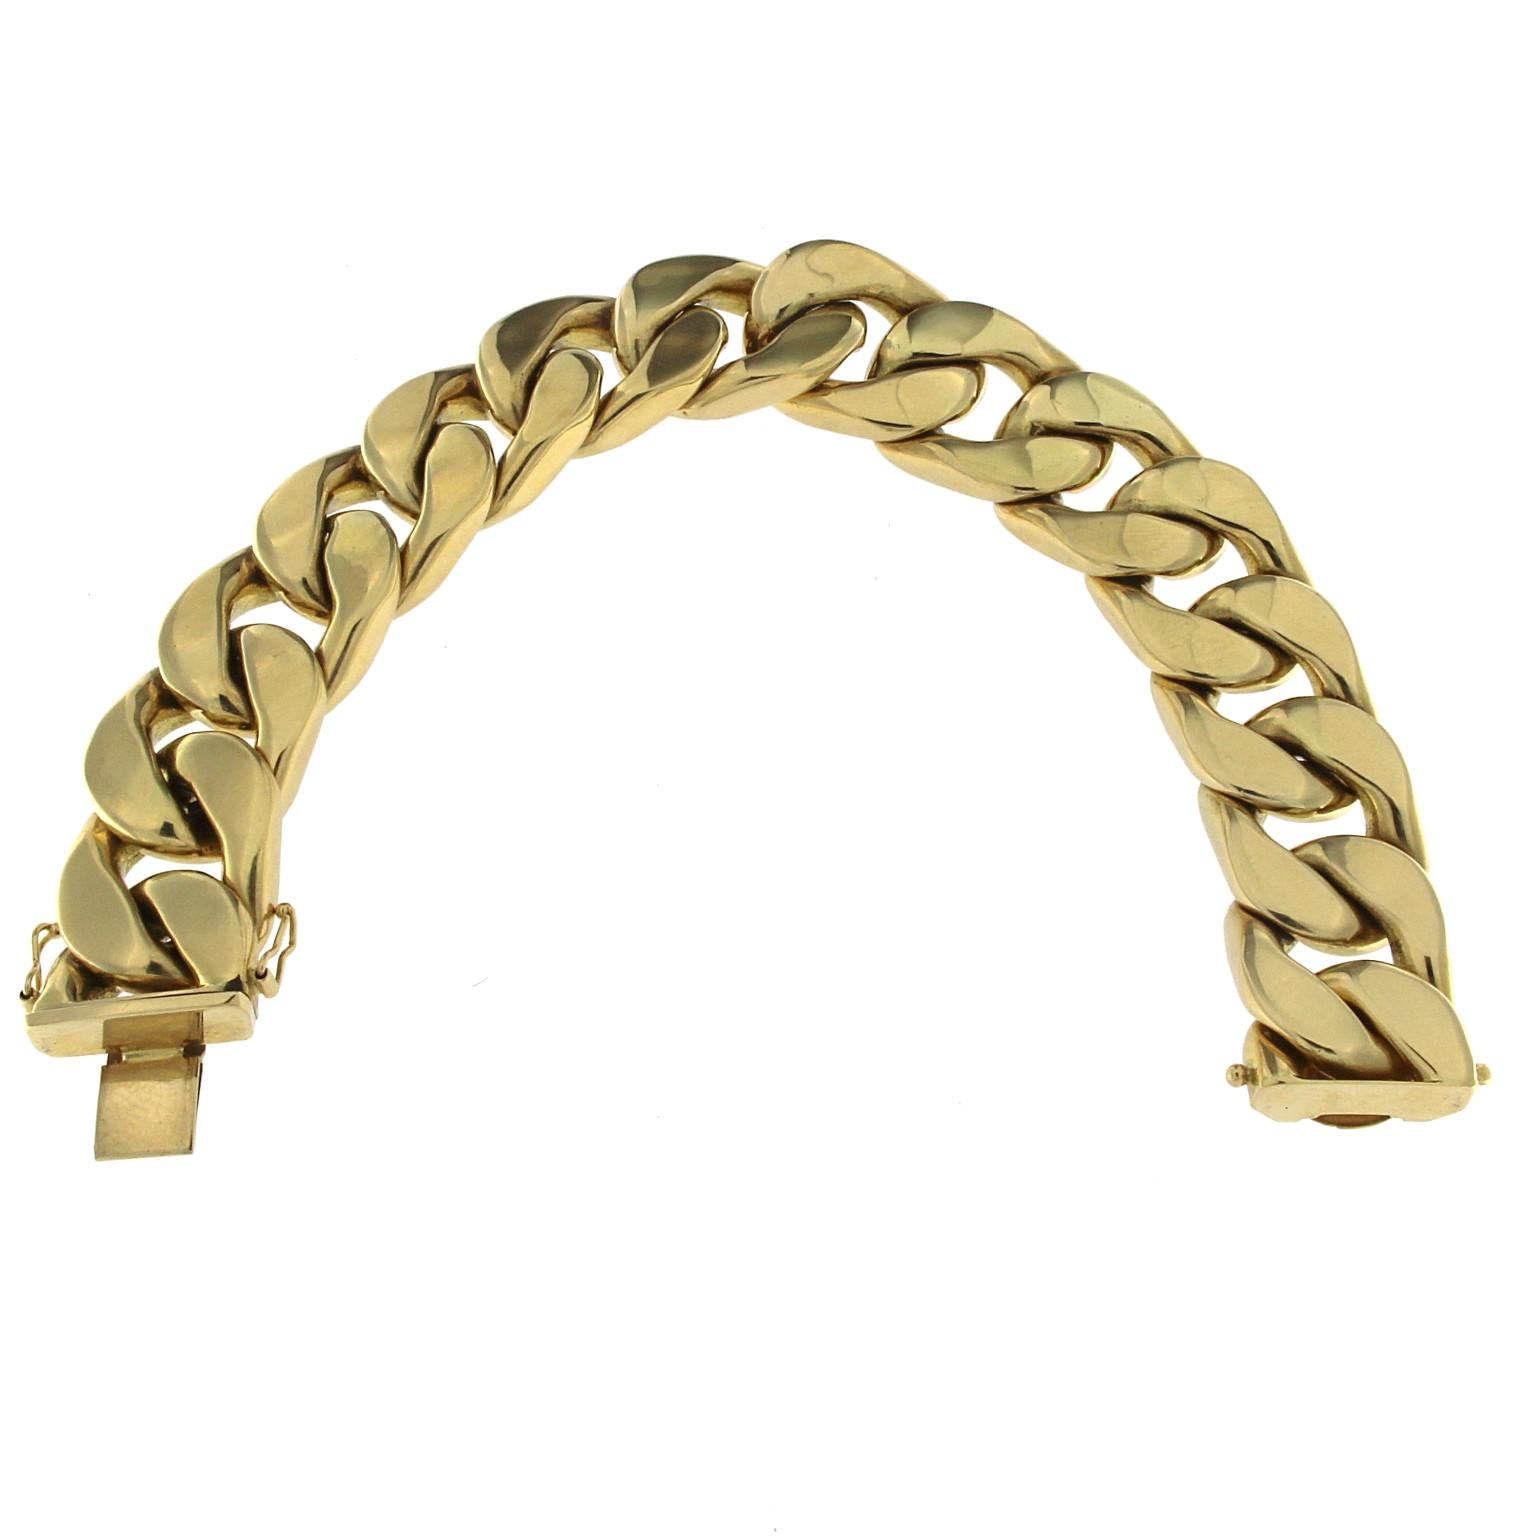 Groumette style coupled chain bracelet with great visual effect
Total weight of yellow gold 18 kt gr 88.00
Stamp 750

